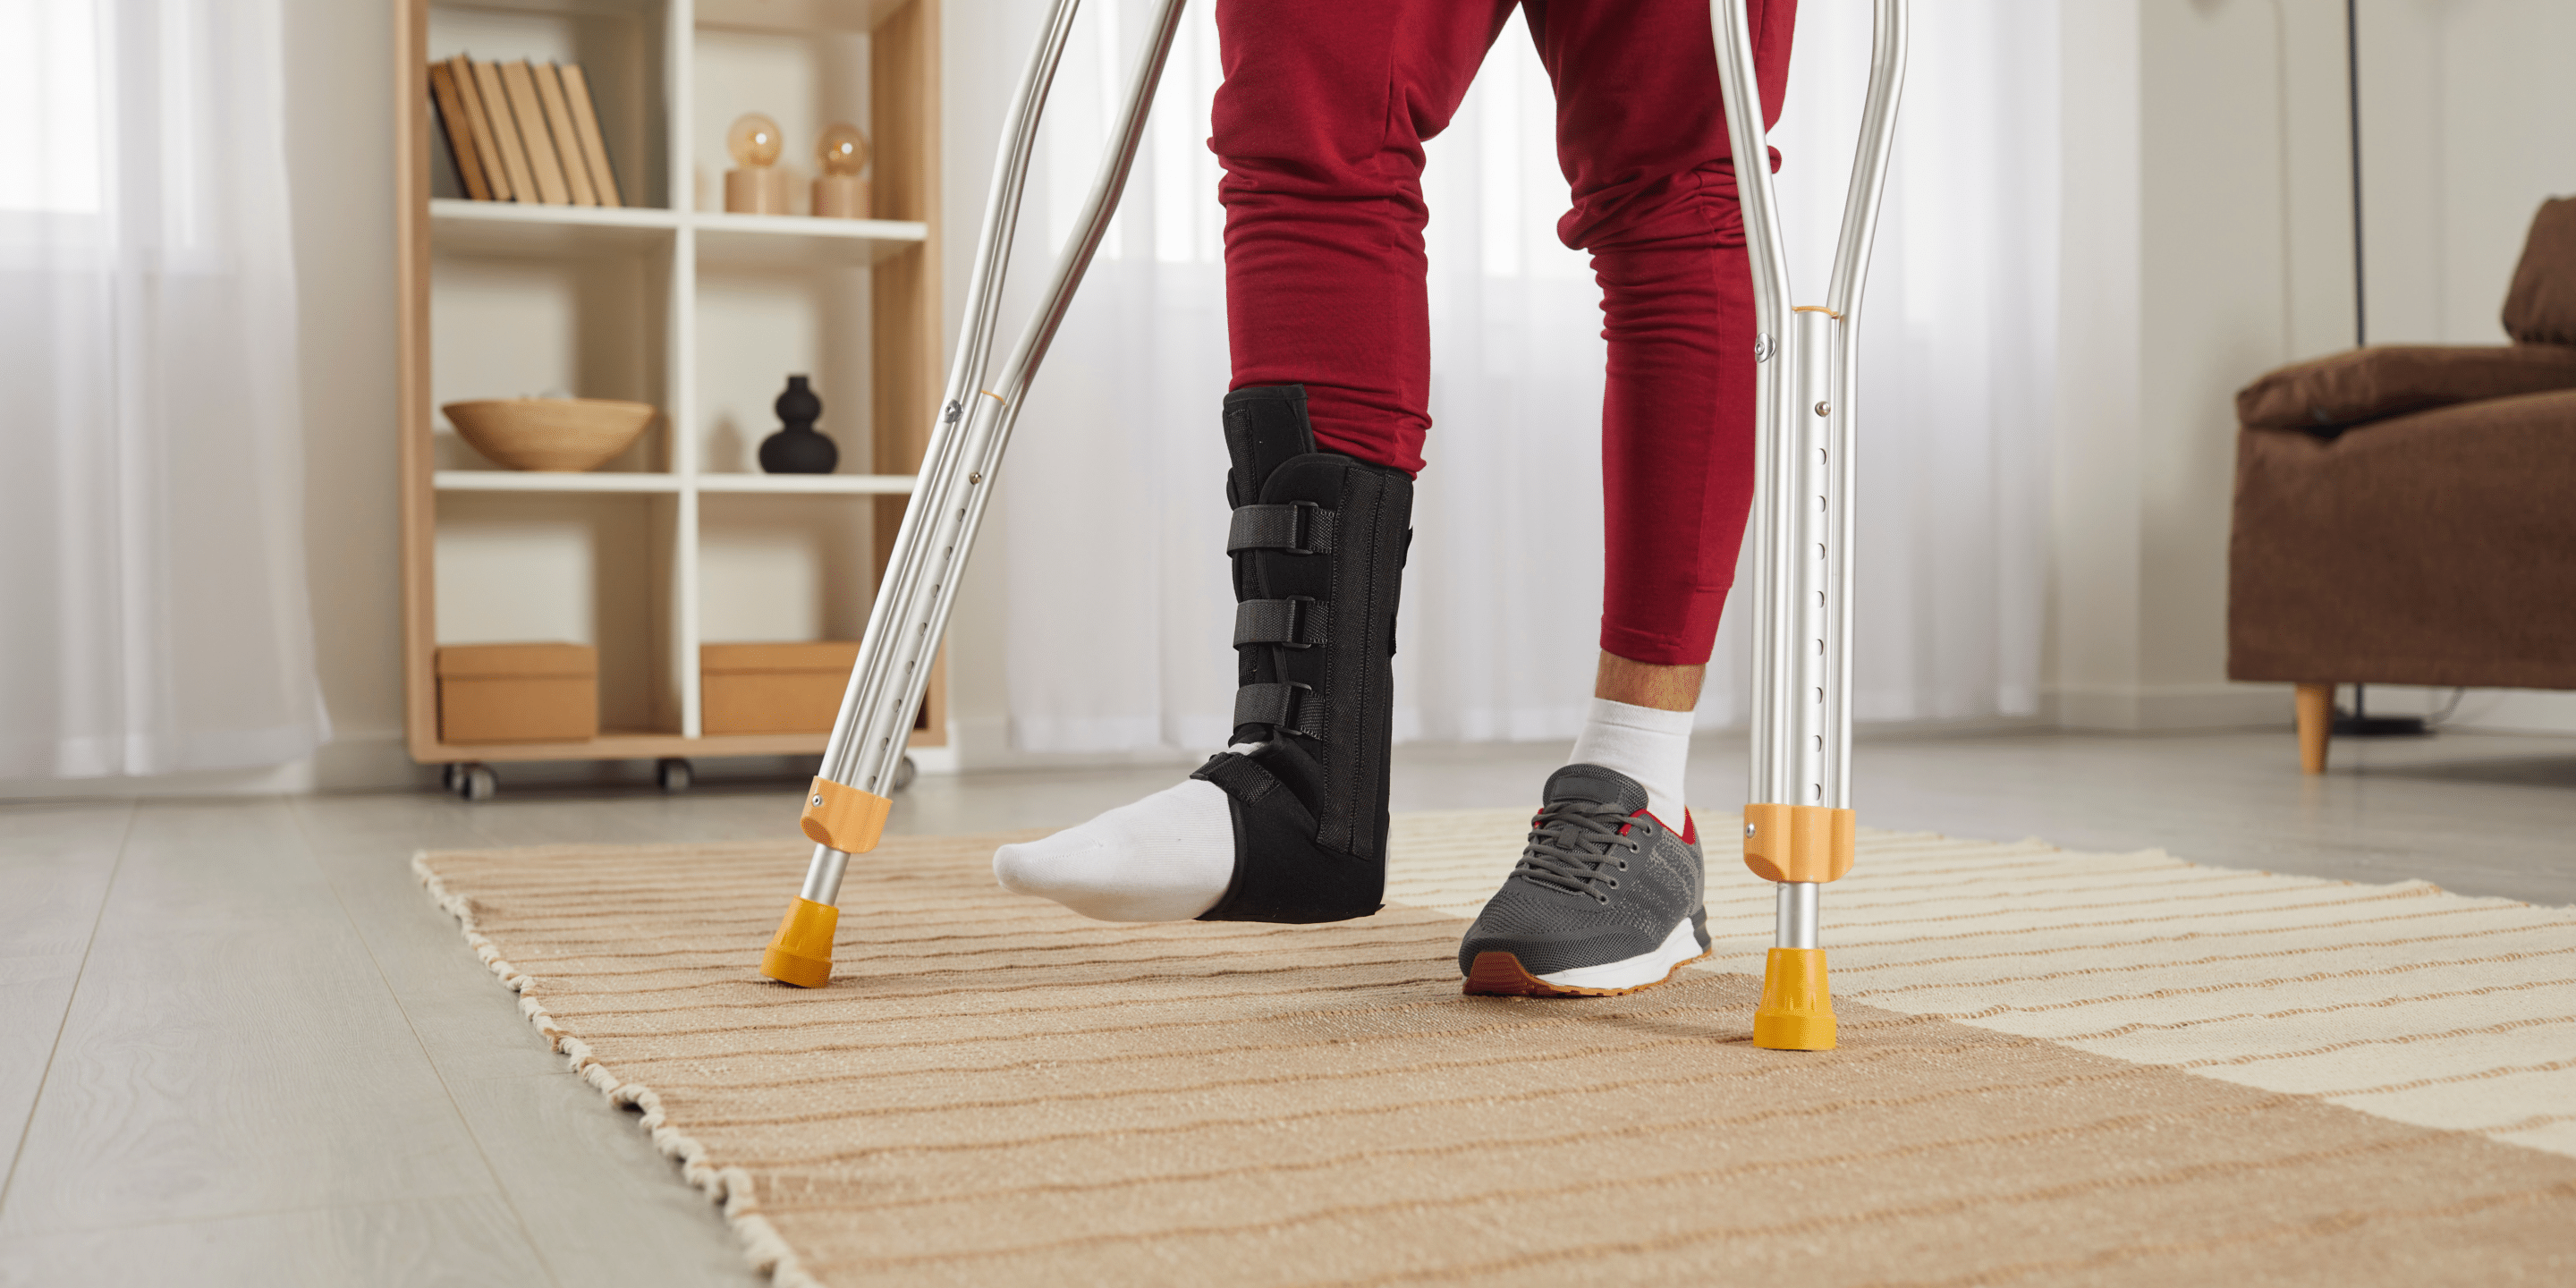 Unwell man with broken leg in plastered splint walk on crutches at home. Unhealthy injured male make first steps have rehabilitation after foot injury or trauma. Health problem, rehab concept.